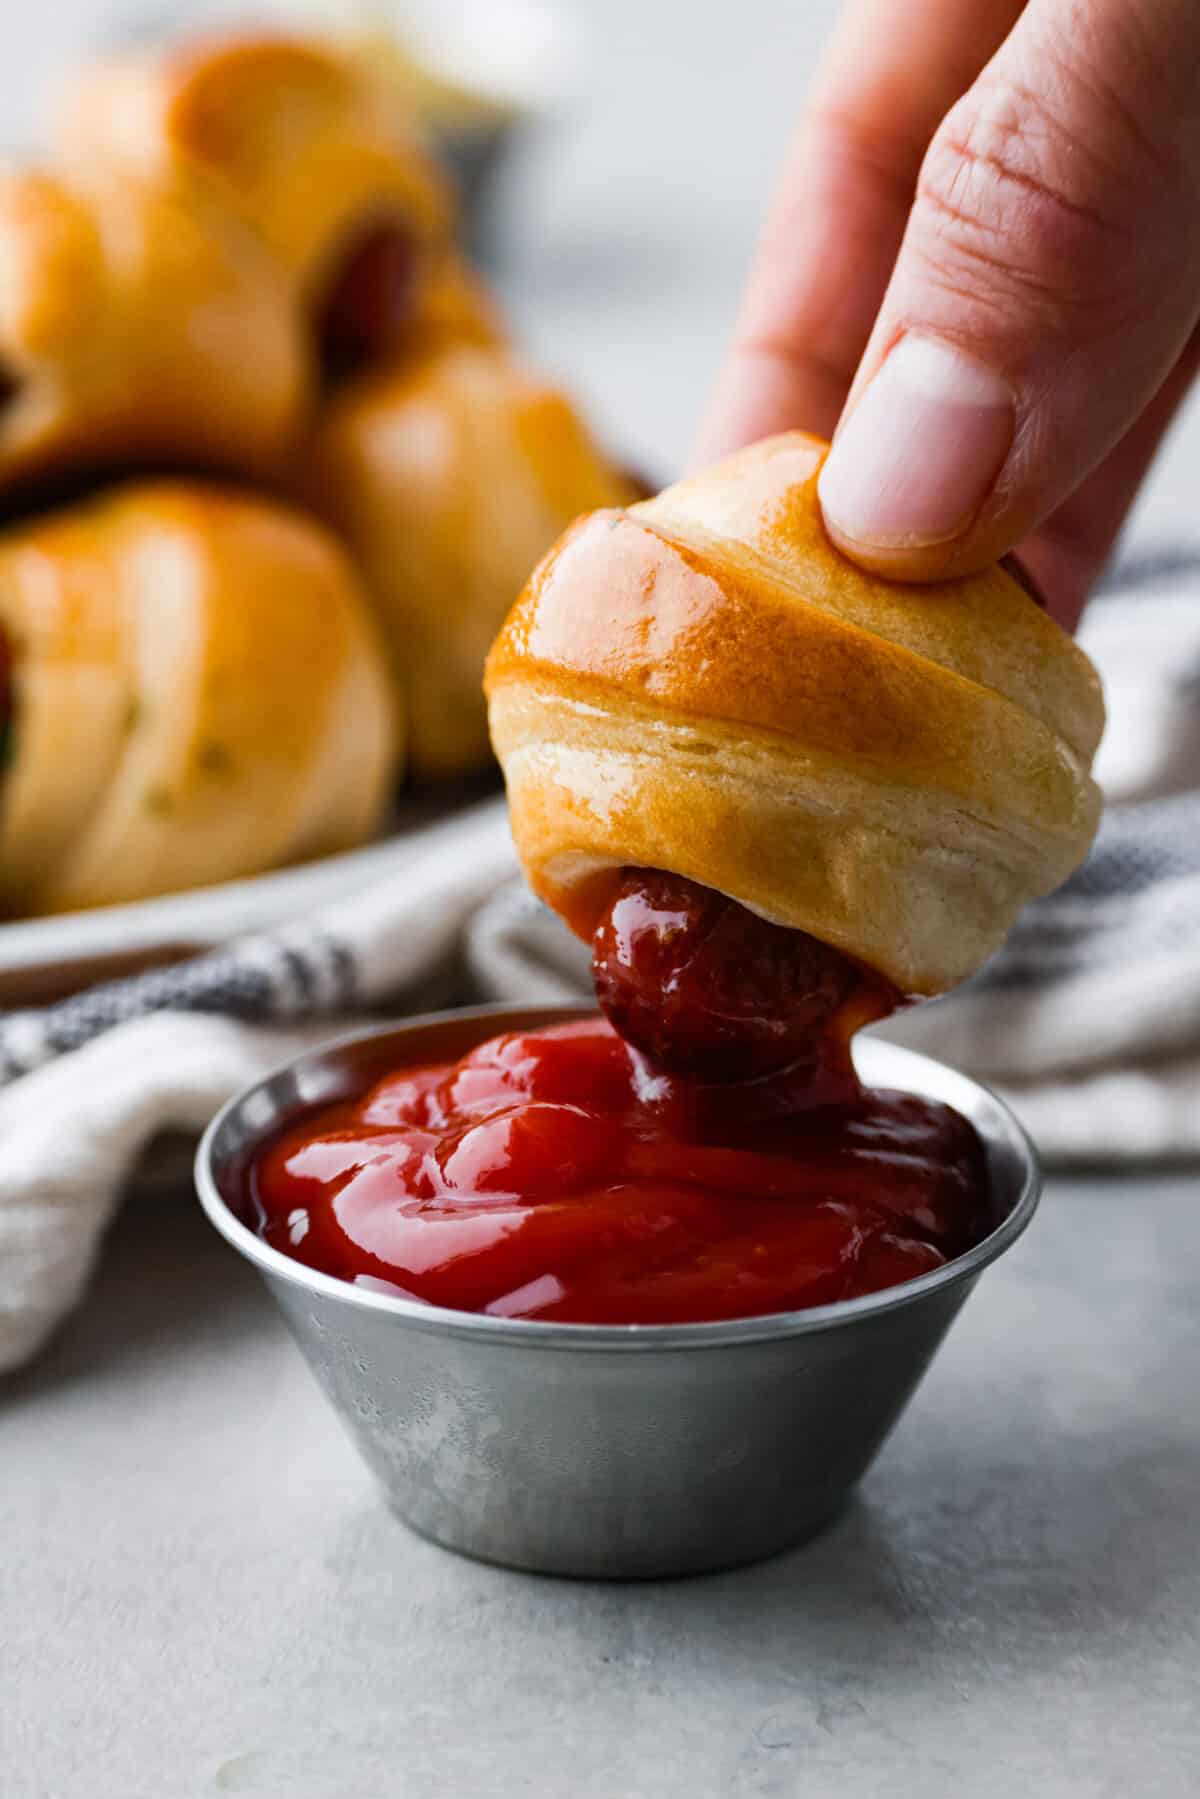 Closeup of one of them being dipped into ketchup.